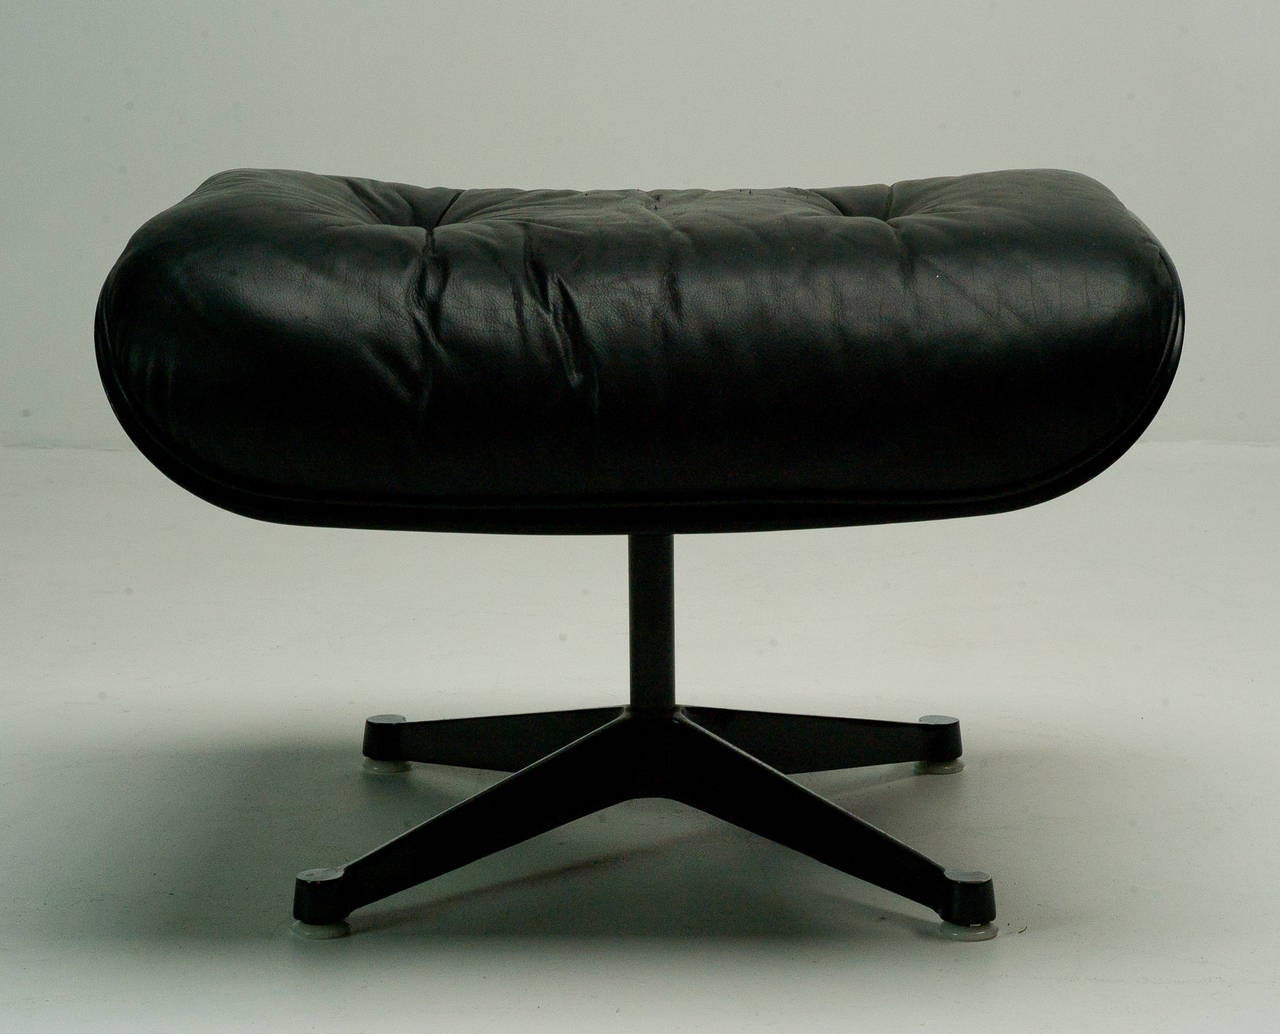 Black leather, black shell ottoman with polished aluminium base by Charles Eames for Herman Miller and Vitra.
